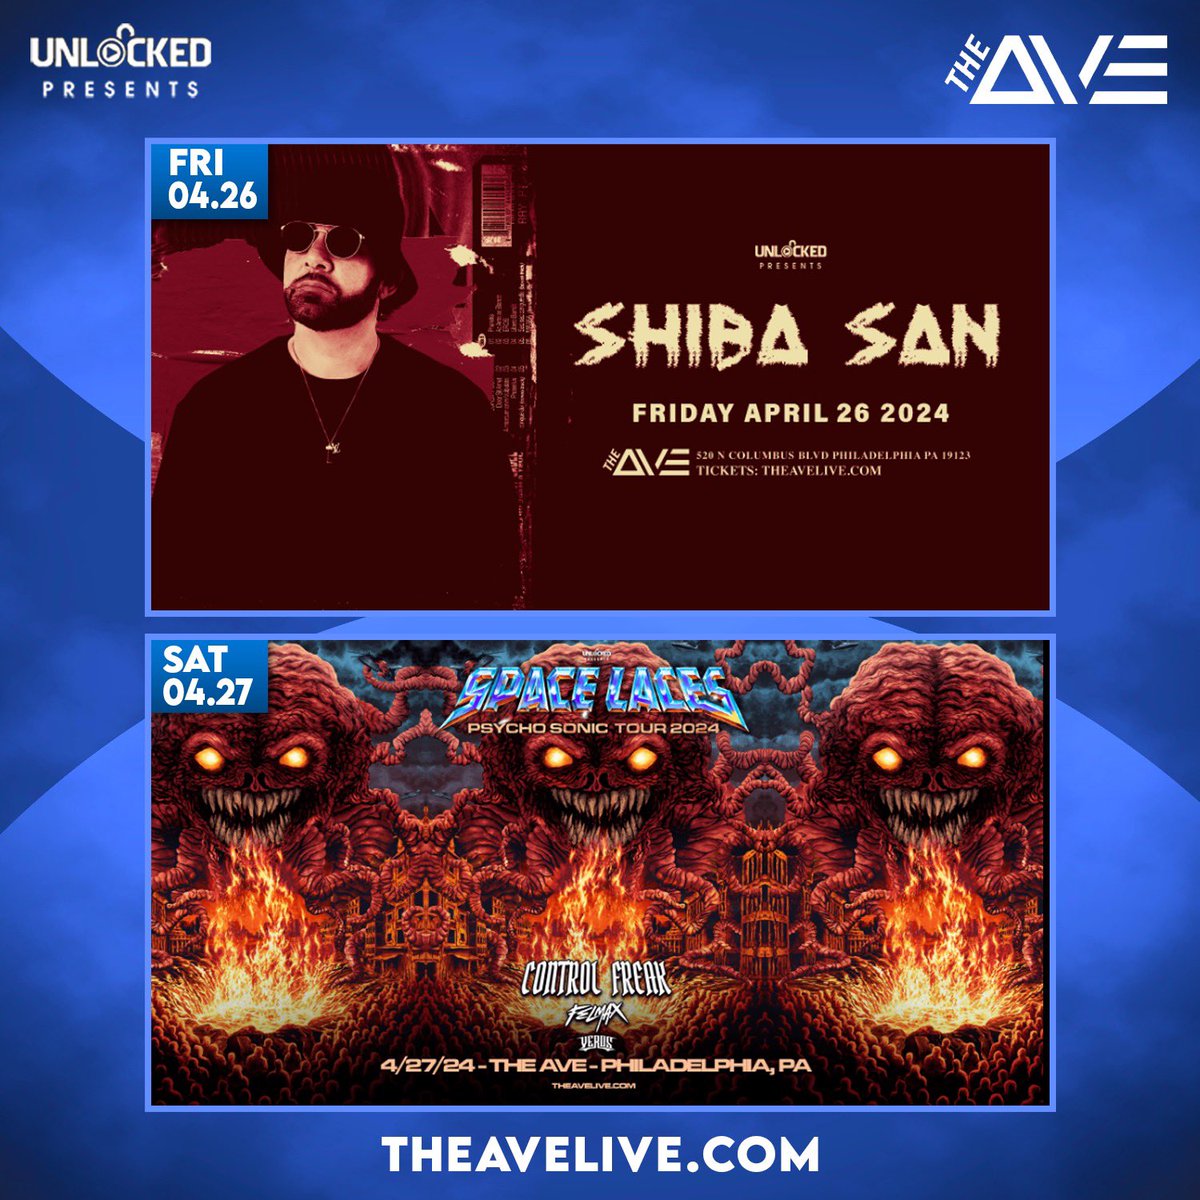 The weekend lineup is lookin 🔥 TONIGHT Shiba San will be throwing down a 4 Hour Extended Set starting at 10pm, and SATURDAY Space Laces will be joining us with support from Control Freak, Felmax and Veros - Don’t miss out on tickets and tables at TheAveLive.com